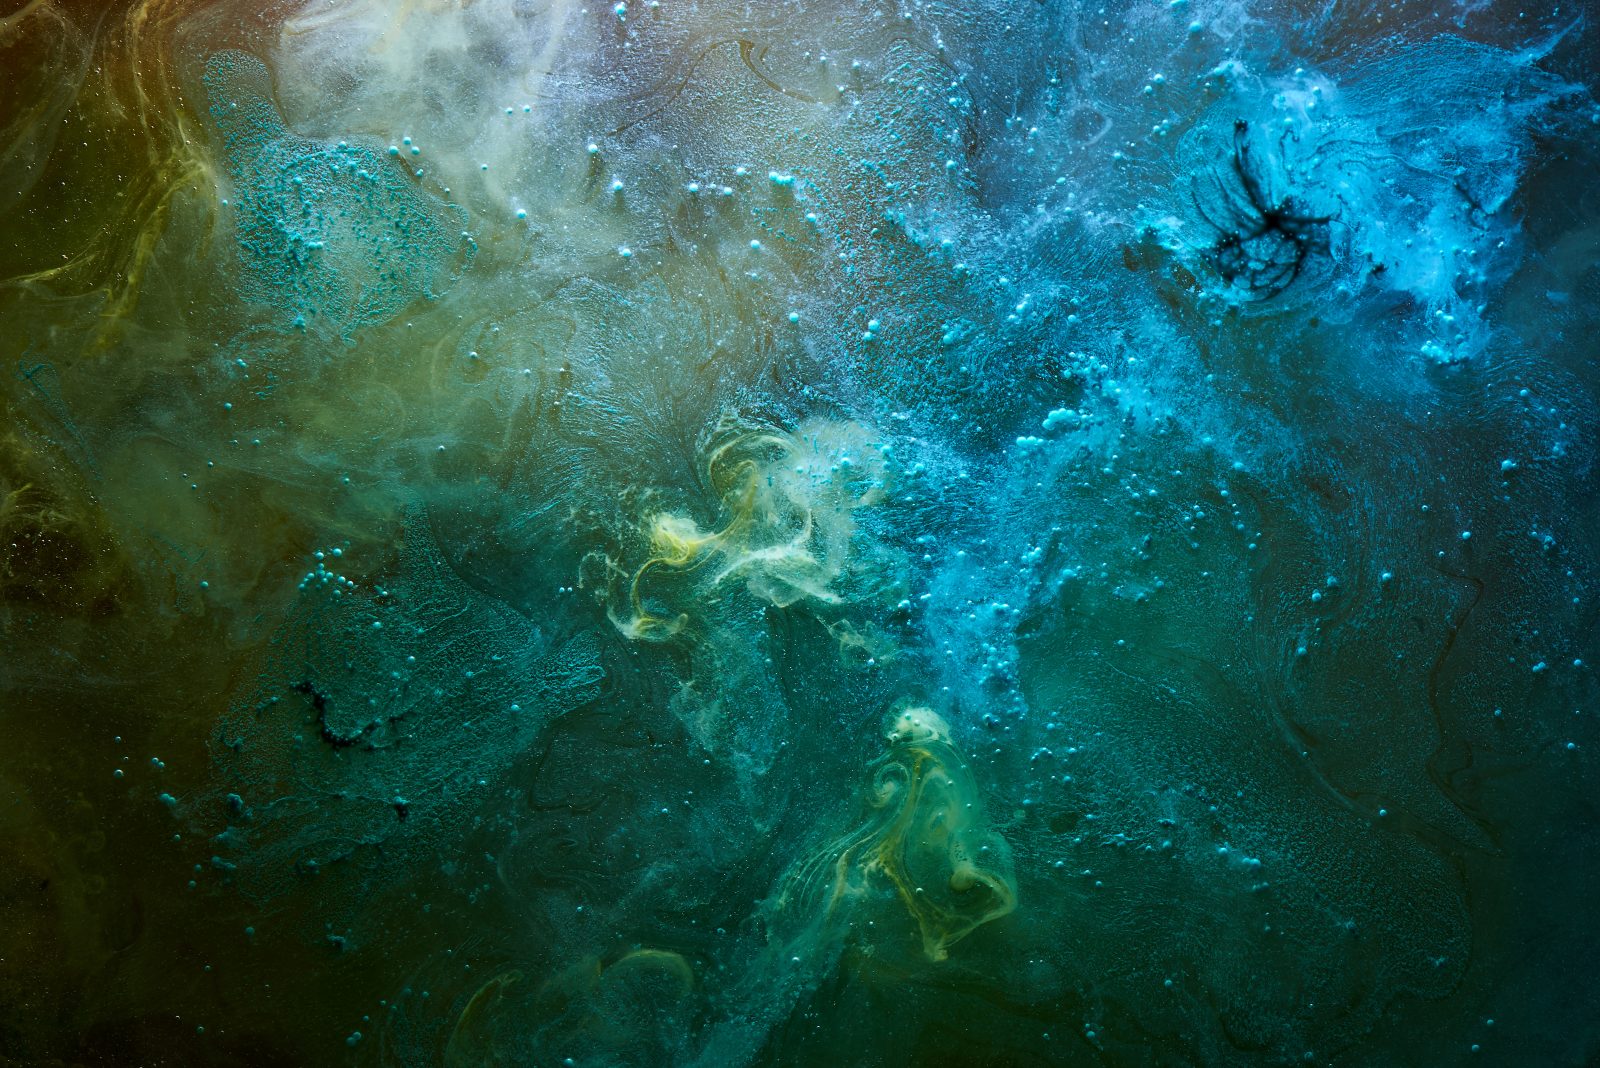 Green blue abstract exoplanet outer space vibrant sea. Waves, splashes and drops of water paint. Mysterious esoteric depths of the galactic ocean